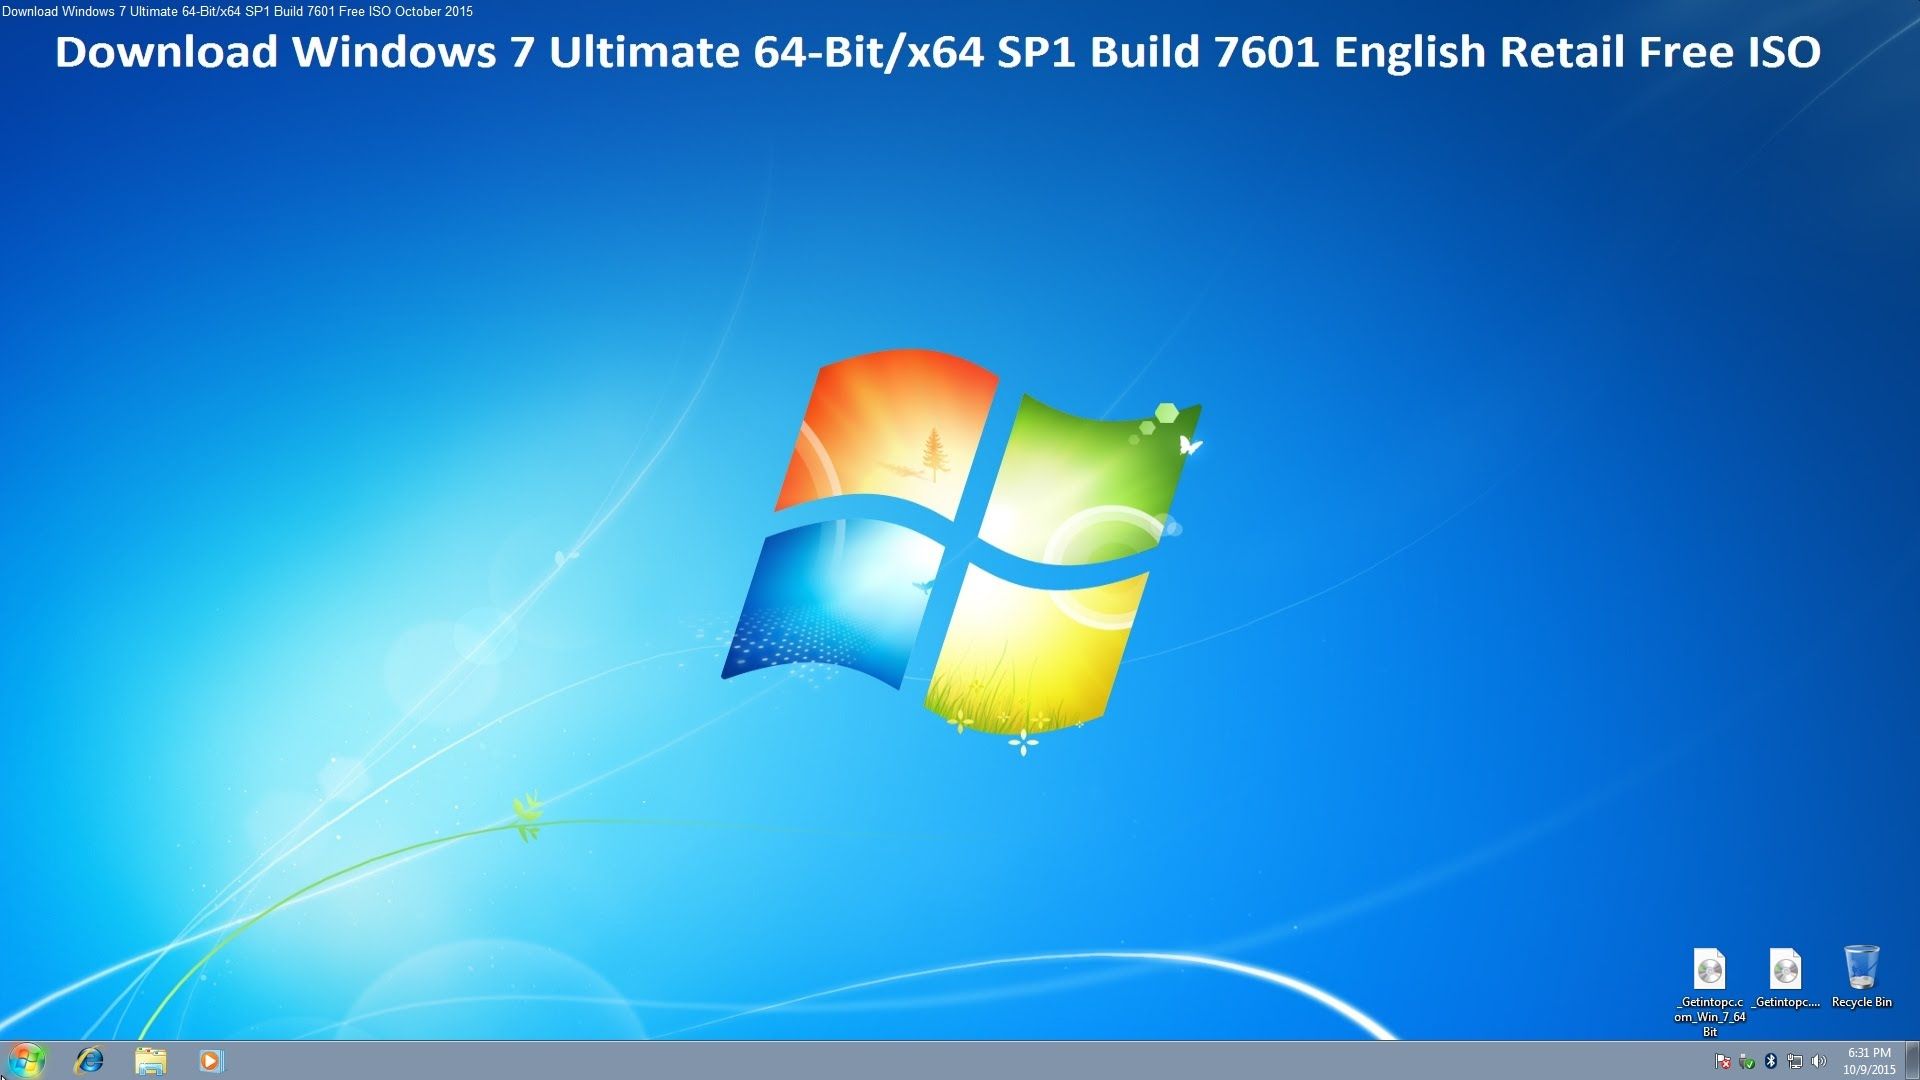 Win7 Ultimate 64 Bit Iso Free Download